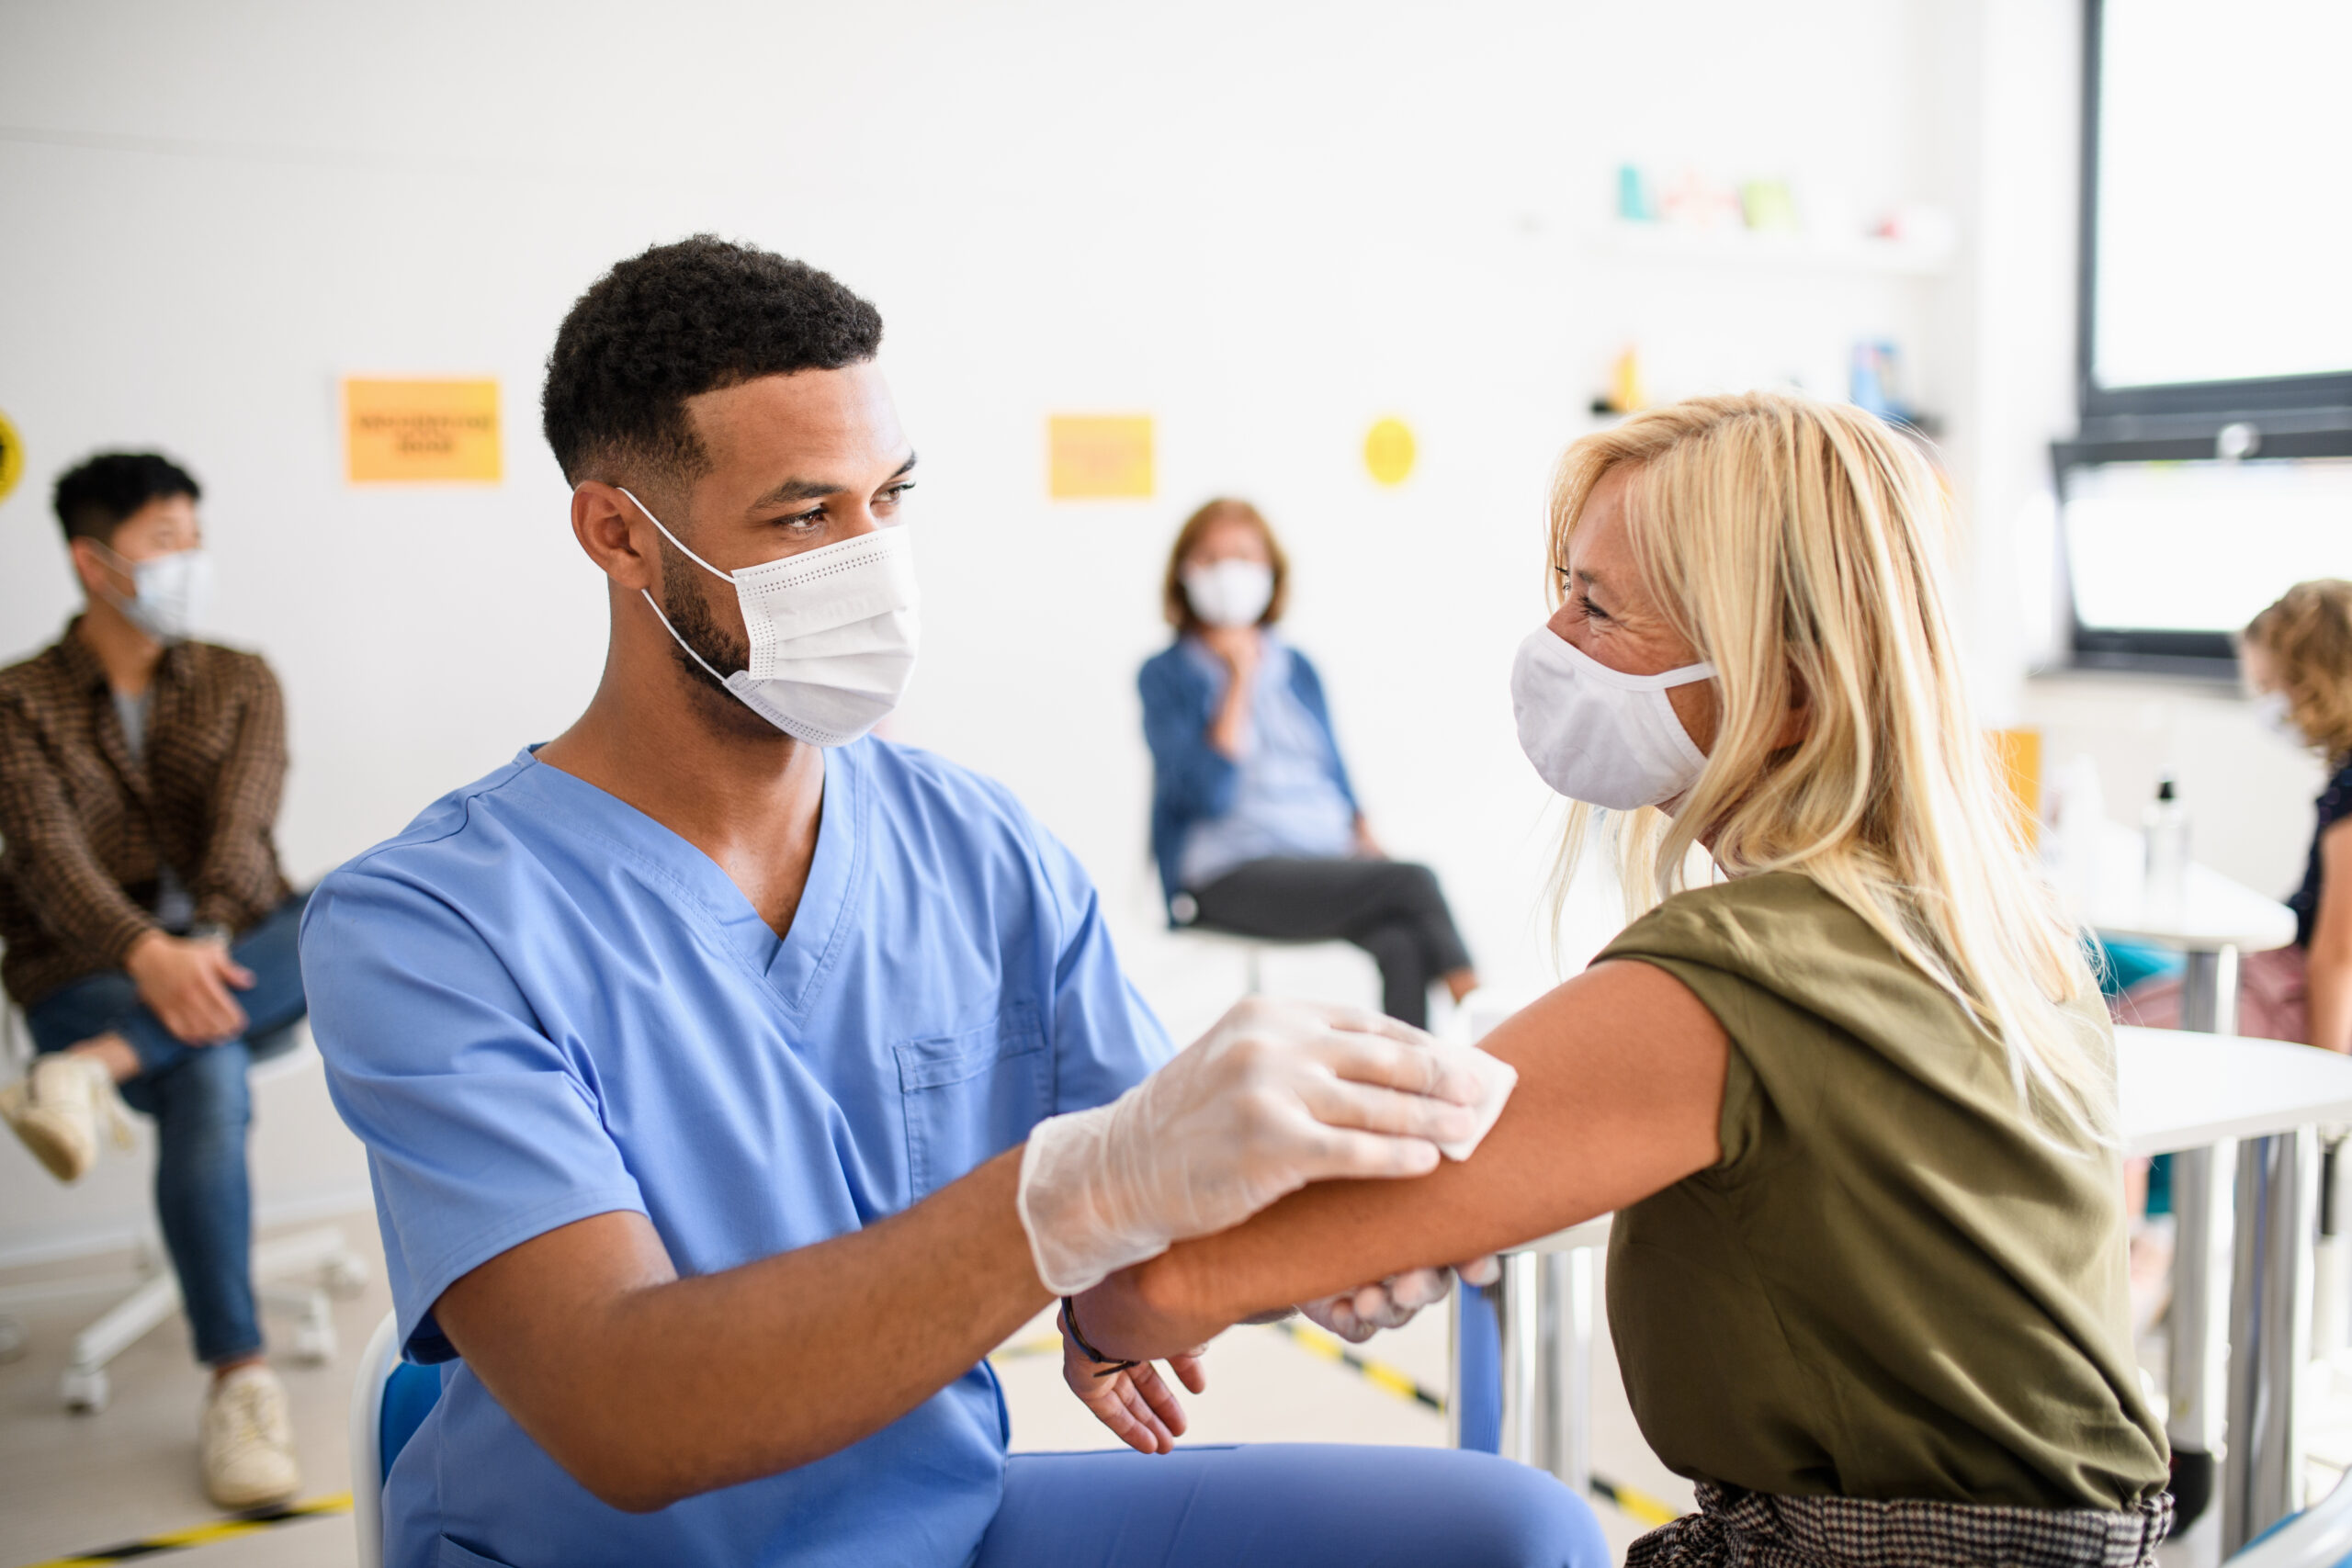 Woman getting a vaccine by a male nurse. Both wearing masks